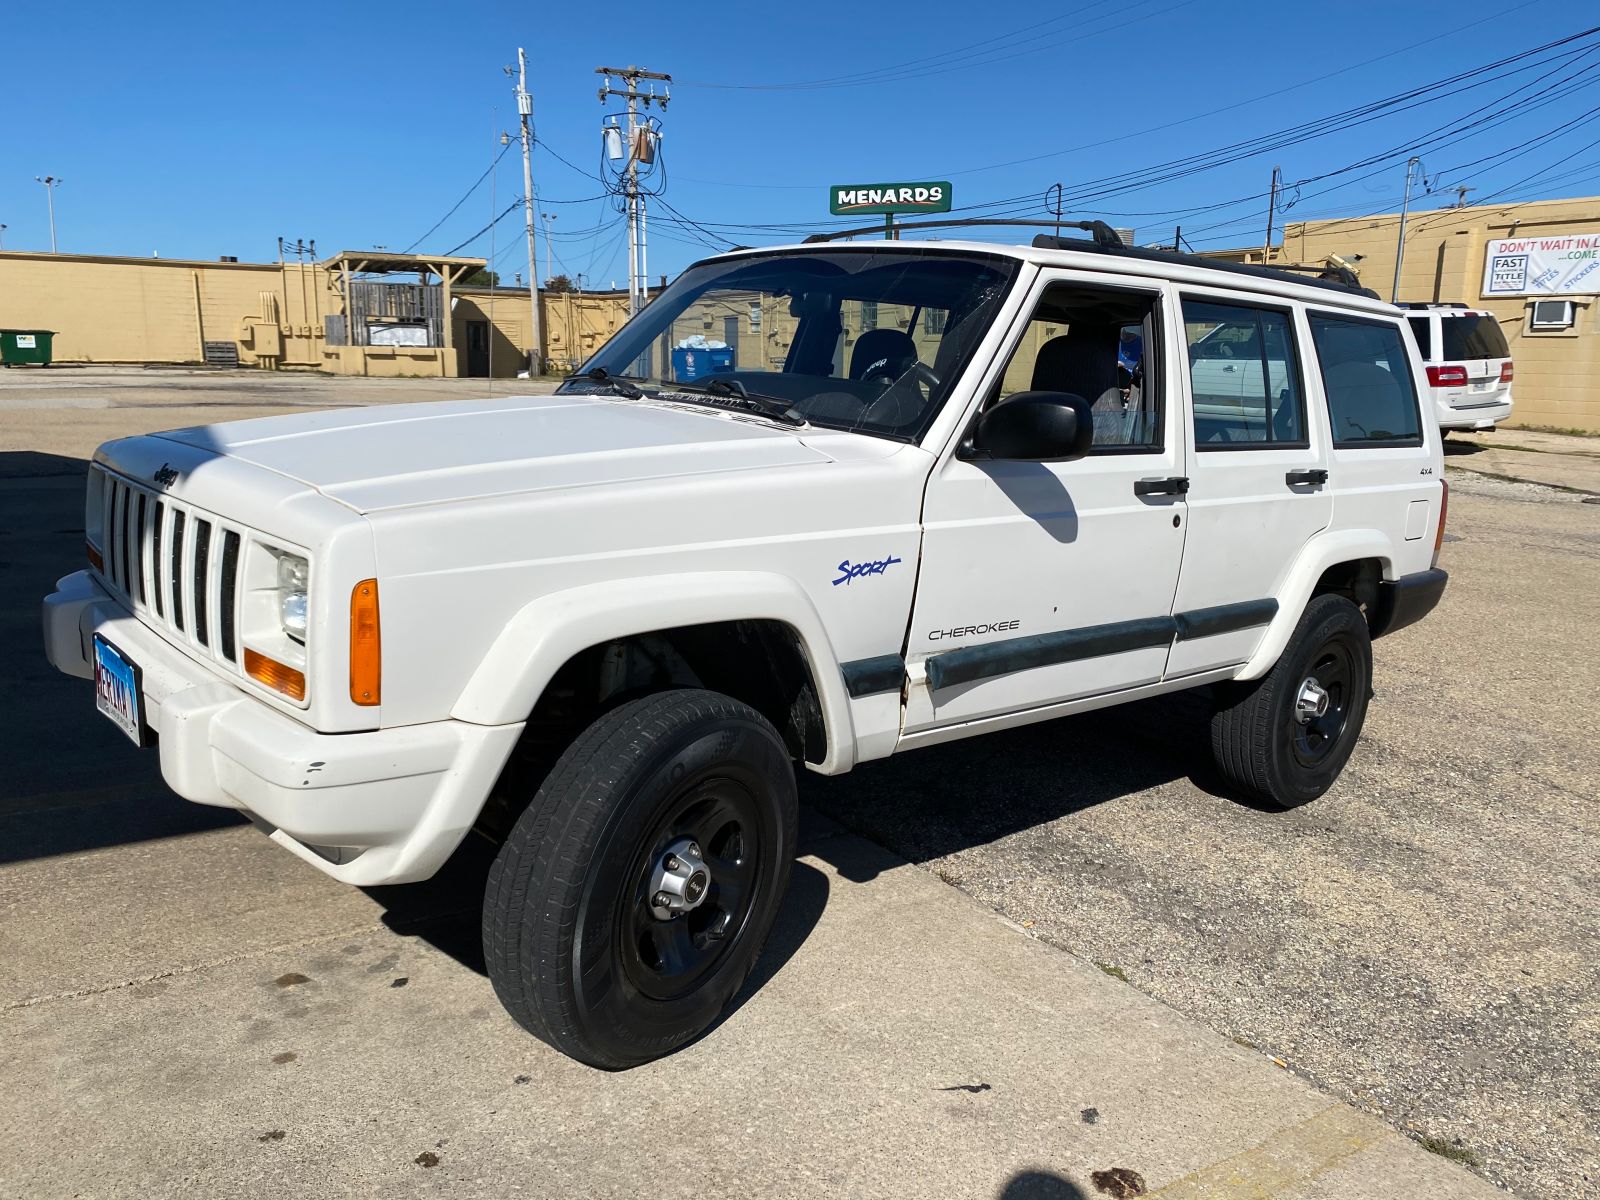 This may or may not be a buffer image designed to avoid spoilers. The Jeep XJ my friend Randy drove me 4.5 hours each way to not buy.